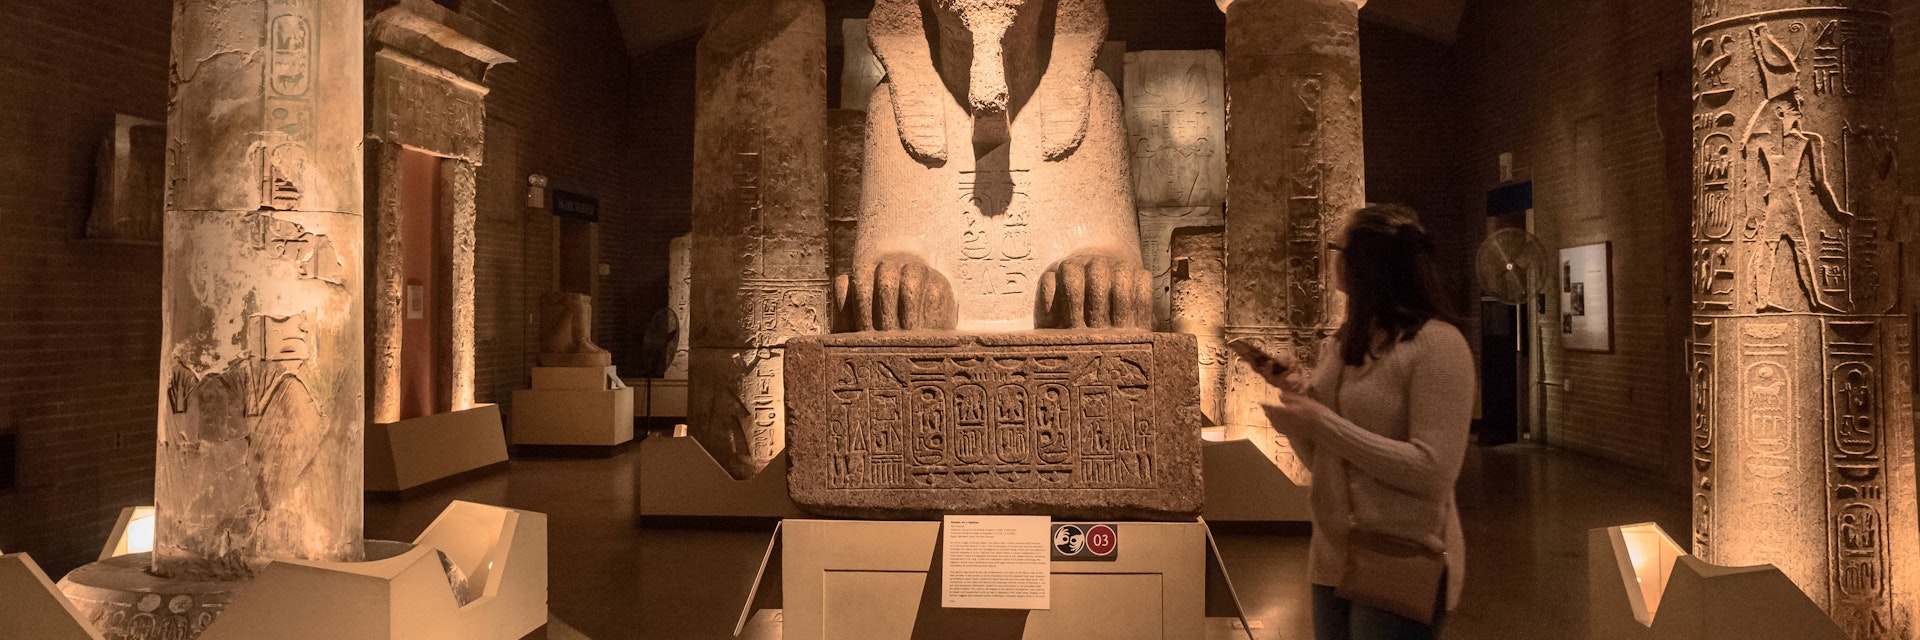 15-ton Sphinx and its surrounding pillars and gateways at the University of Pennsylvania Museum of Archaeology and Anthropology.